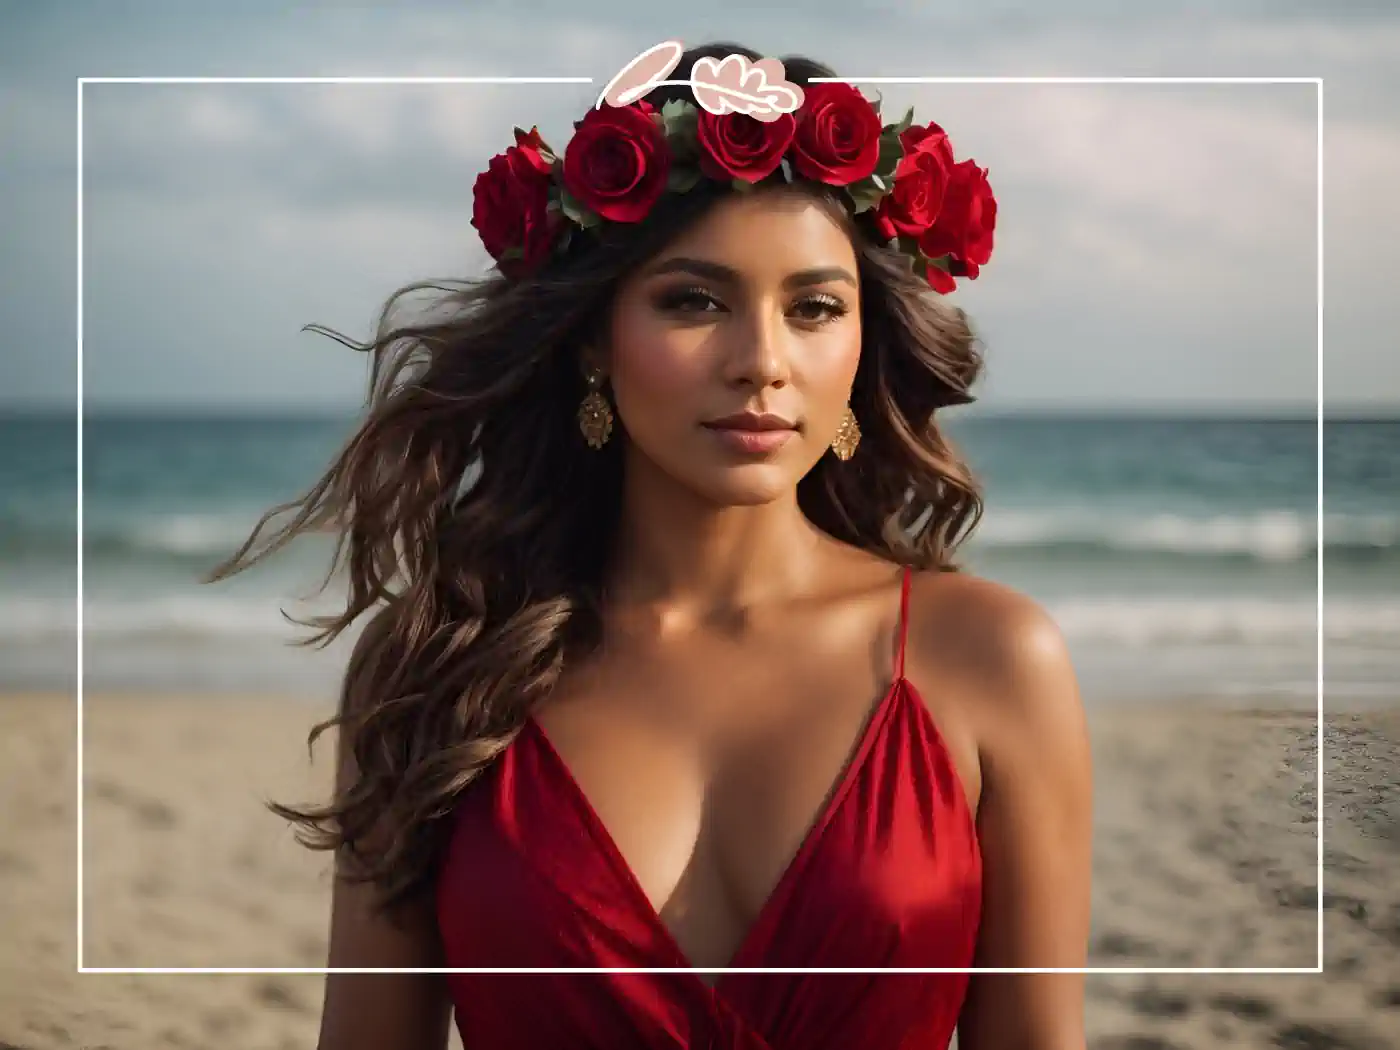 A beautiful woman with a red rose crown on a beach. "Beach Beauty" Fabulous Flowers and Gifts